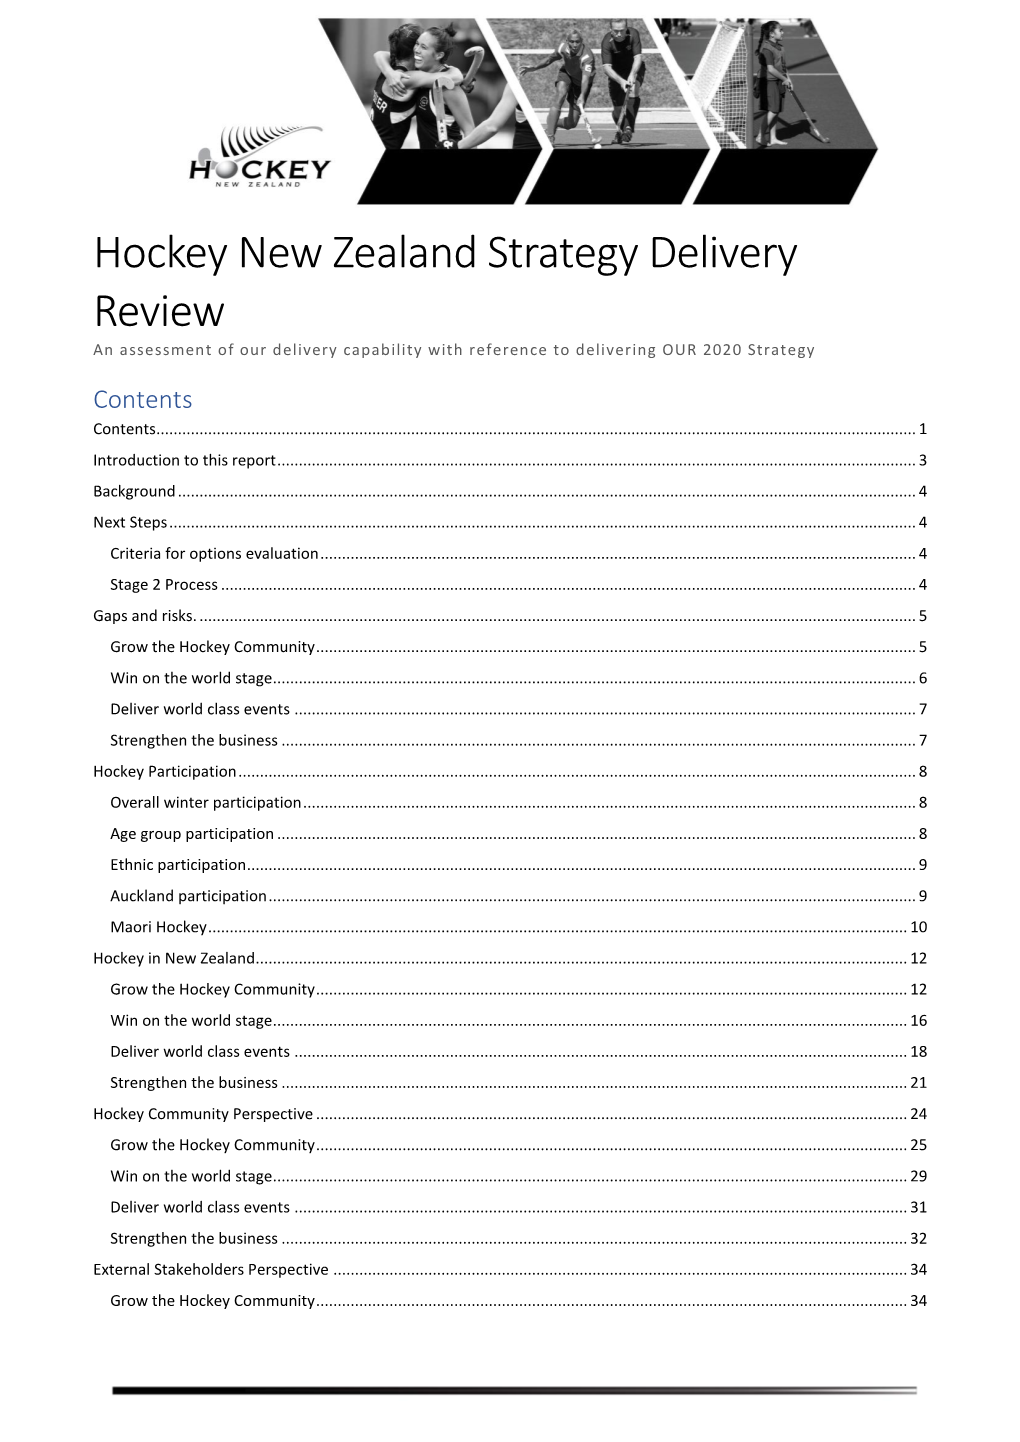 Hockey New Zealand Strategy Delivery Review an Assessment of Our Delivery Capability with Reference to Delivering OUR 2020 Strategy